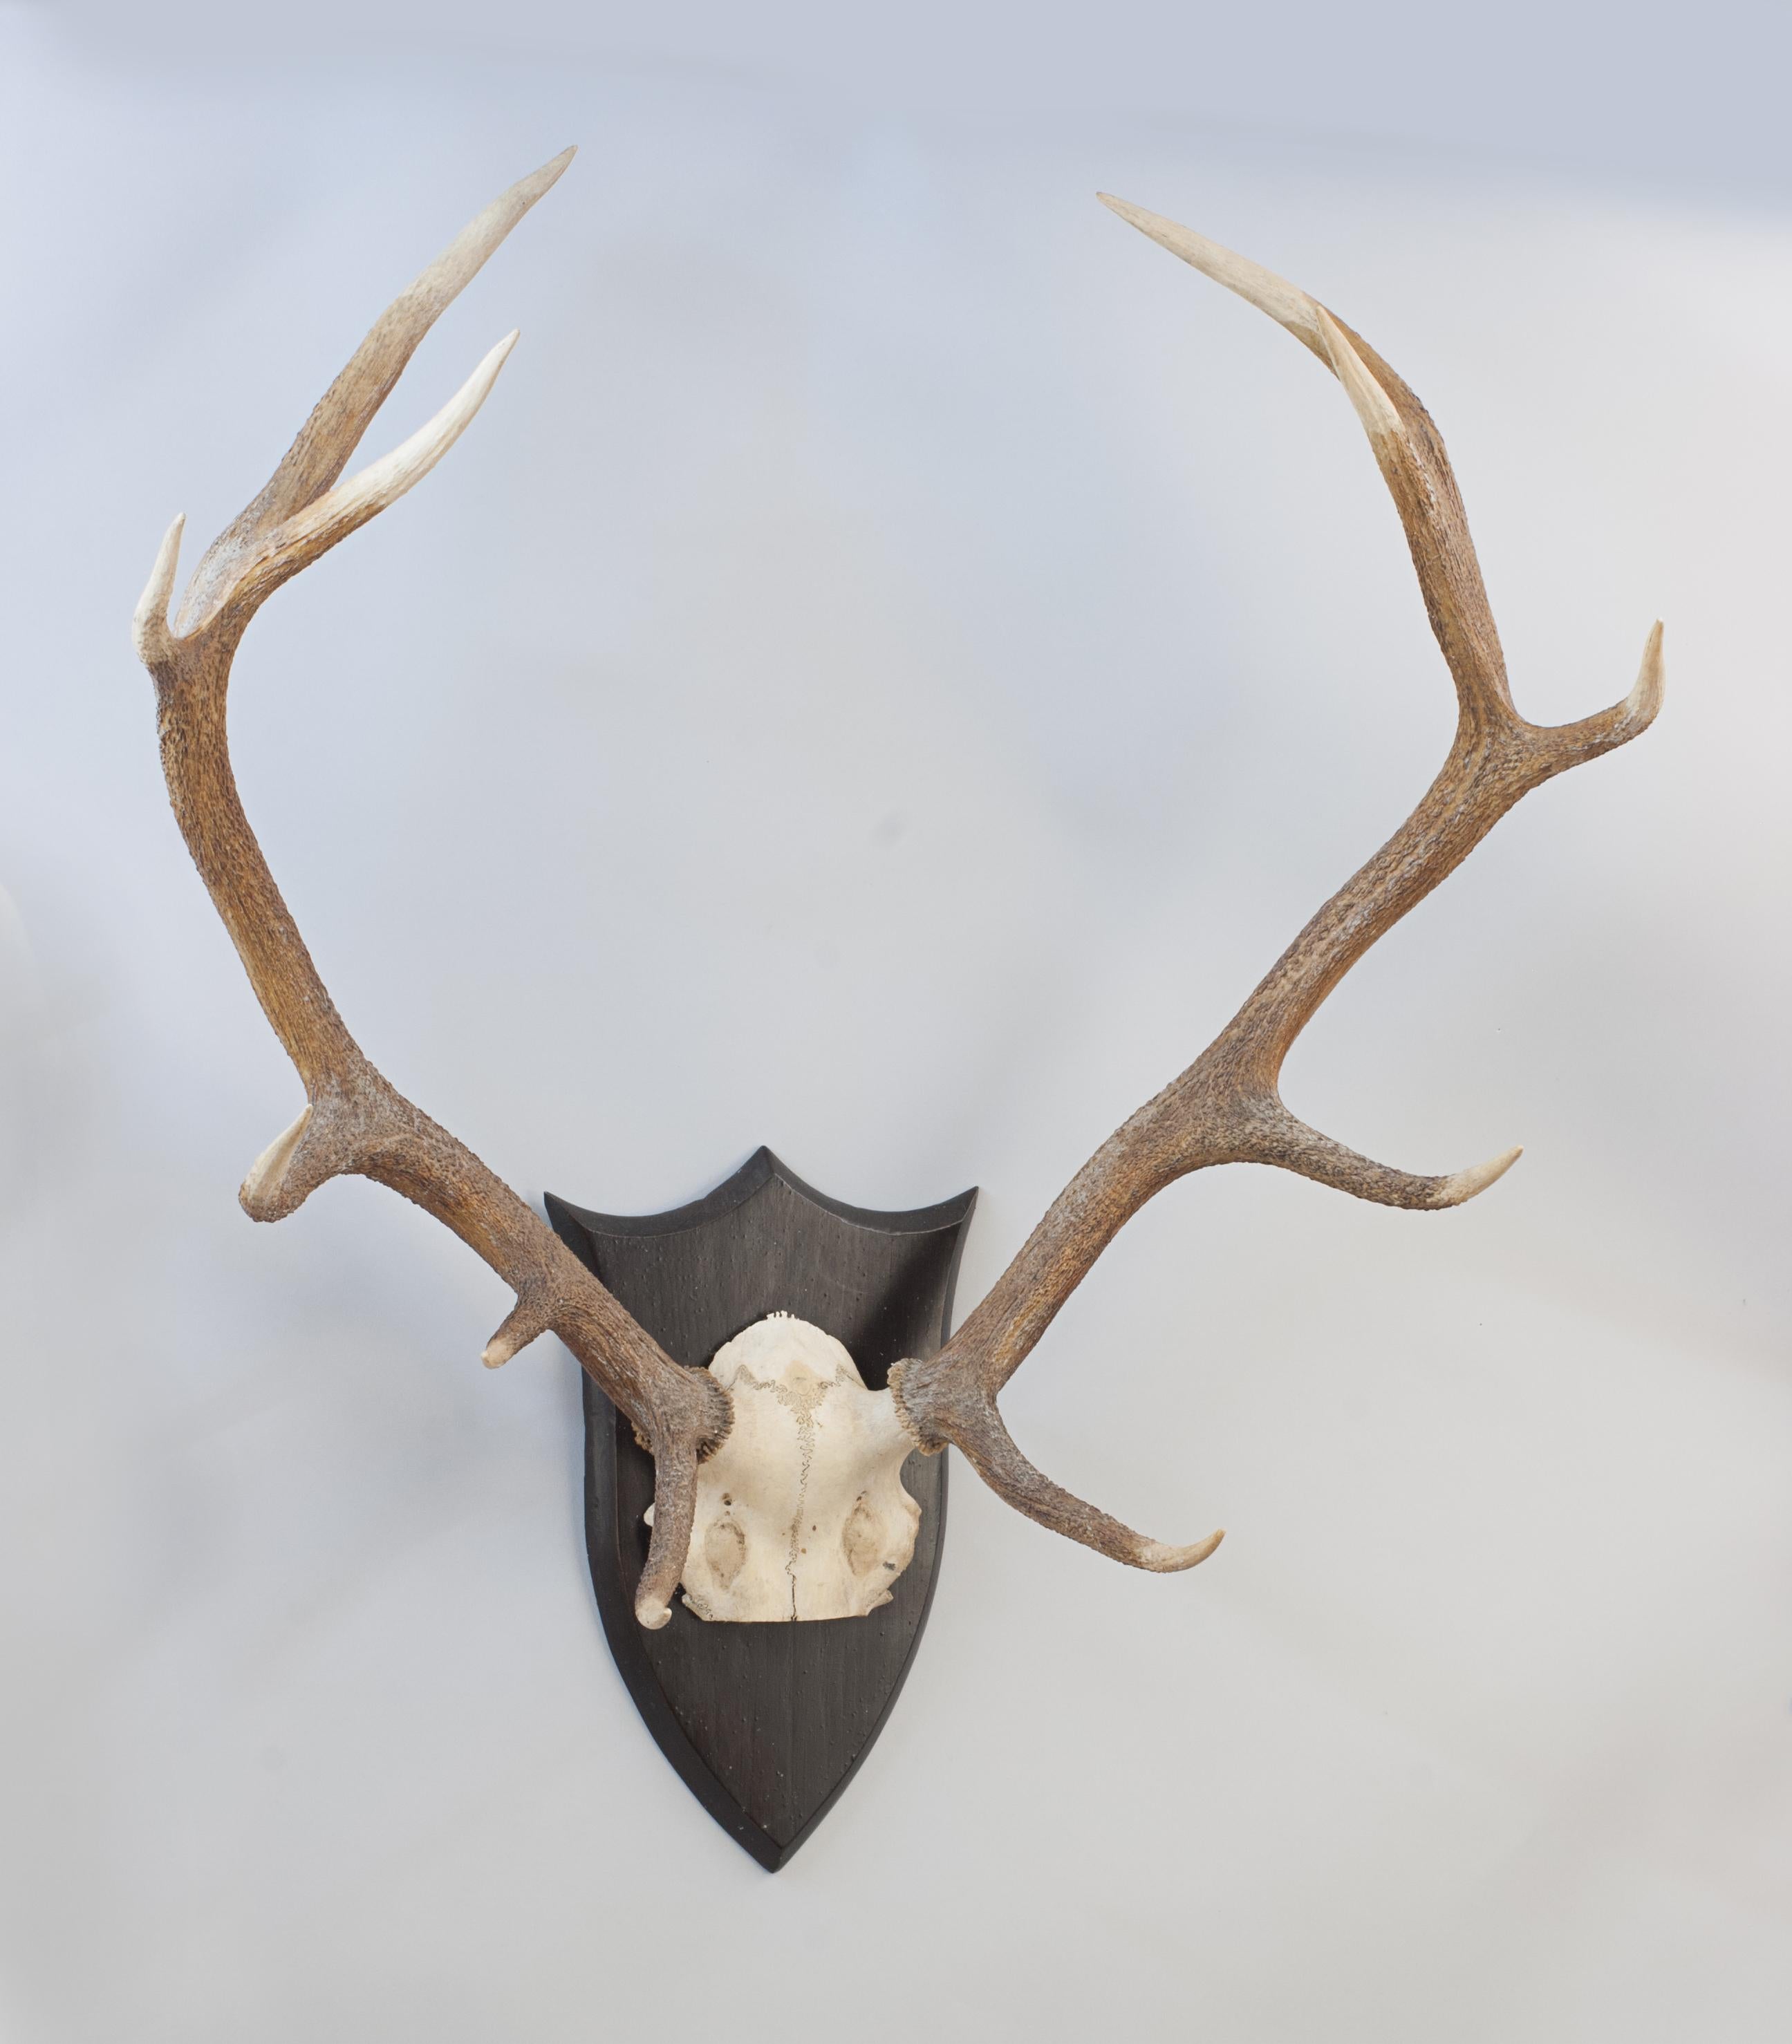 Antique Set Of Mounted Spicer Red Deer Antlers.
A pair of 11 point red deer antlers with skull cap, mounted onto a shaped back board by British taxidermist, Peter Spicer. These stag antlers are an excellent wall display and are mounted onto an